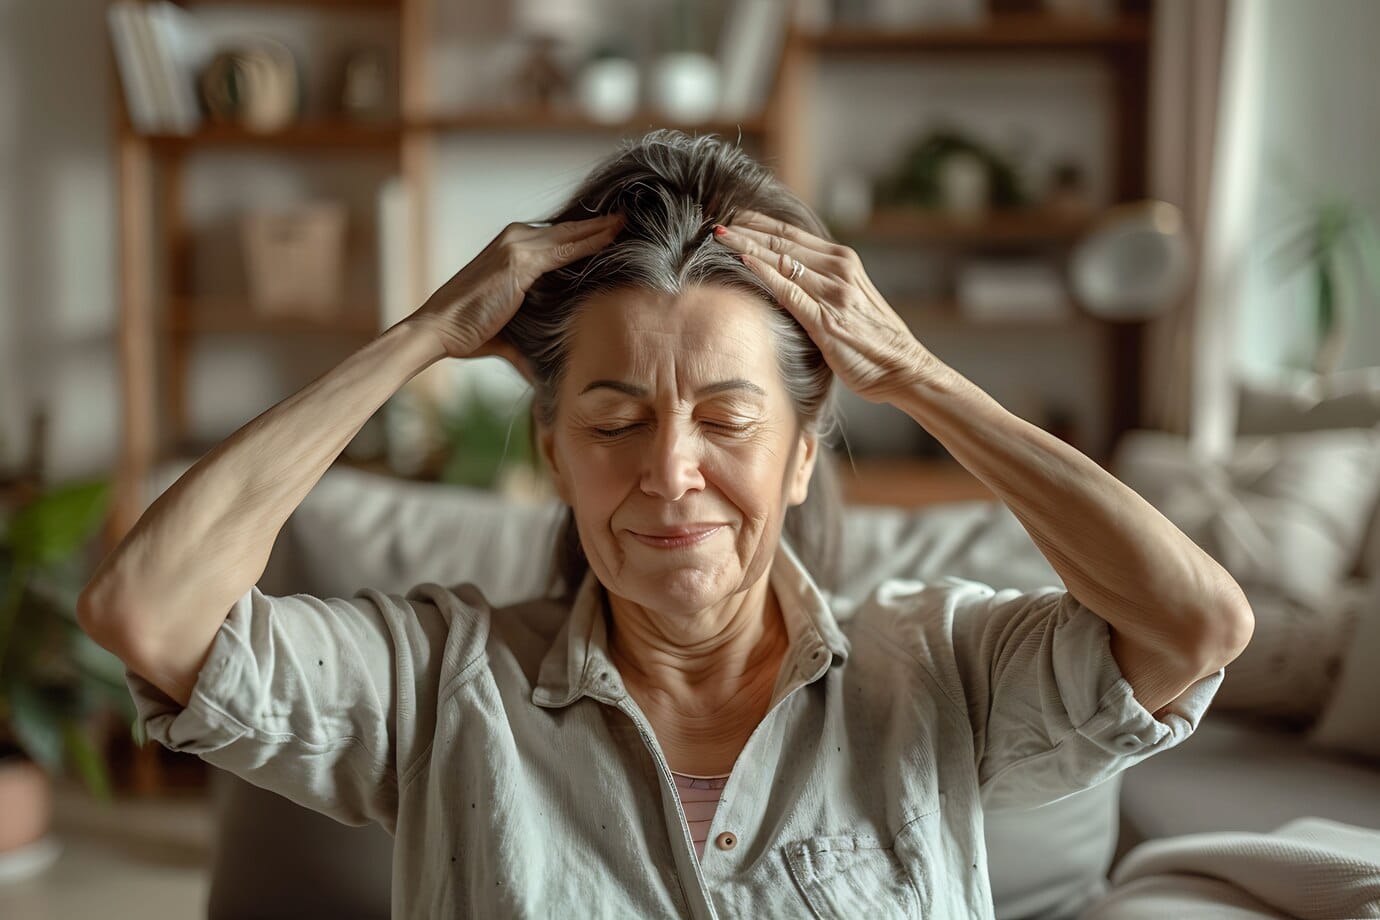 is anxiety a disability in seniors